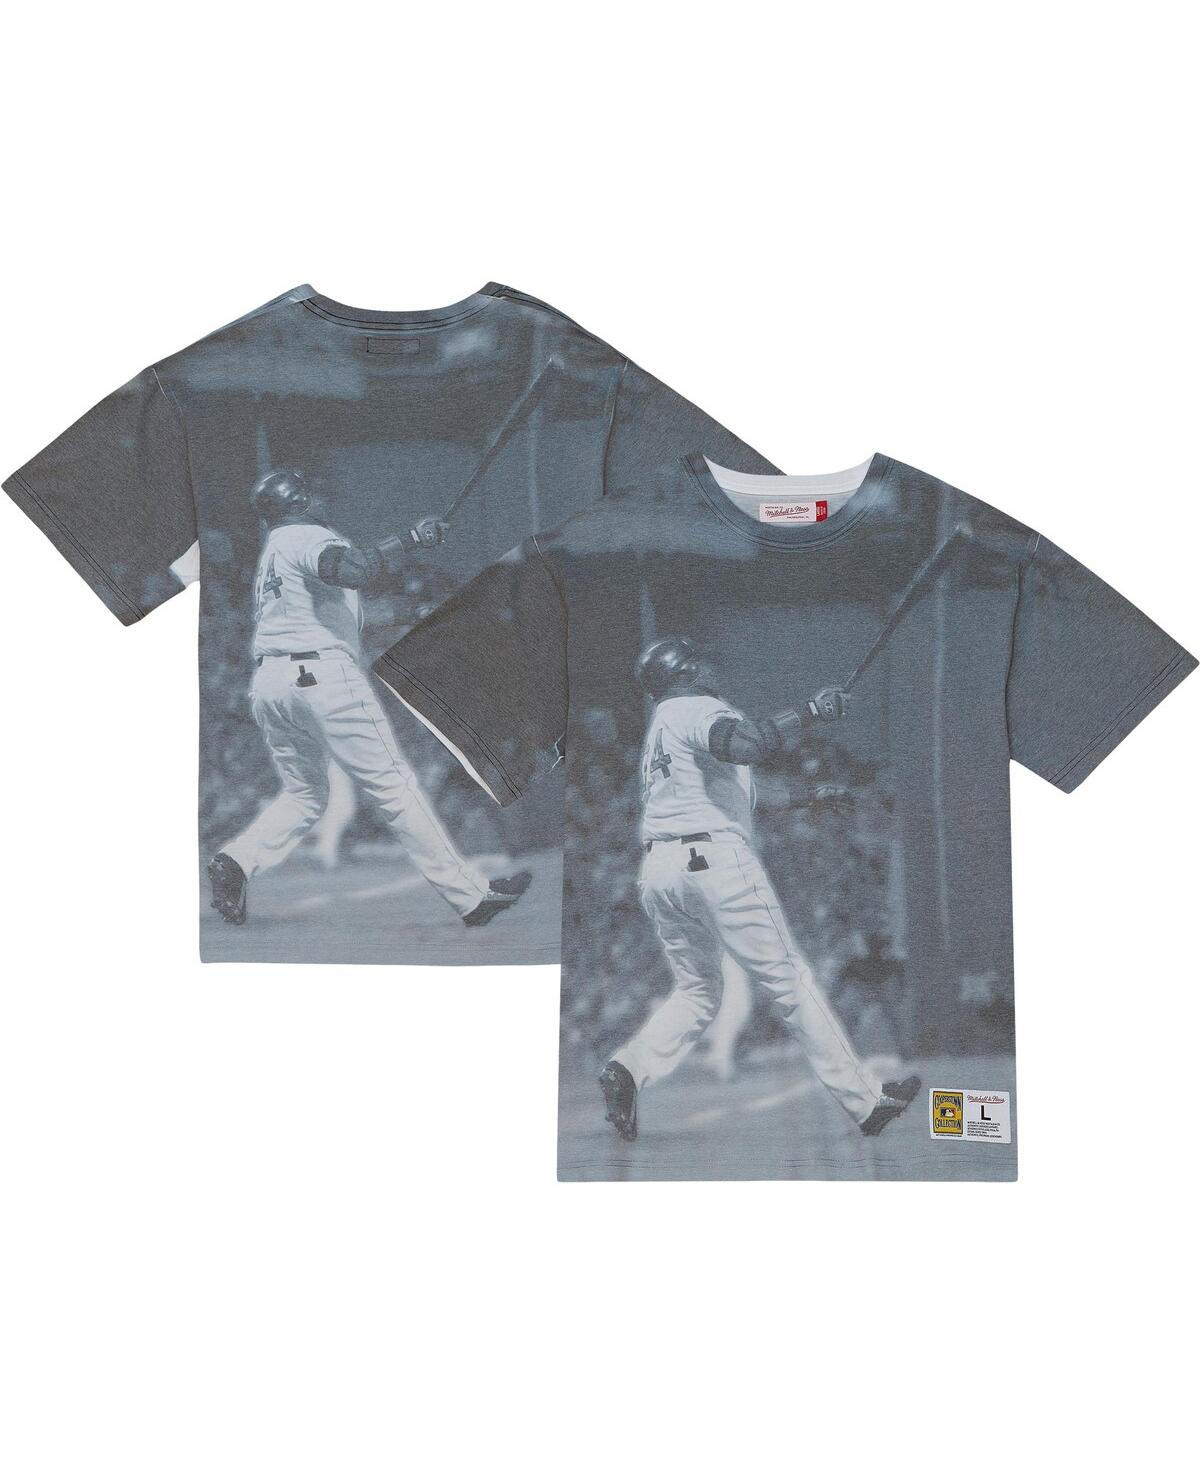 Shop Mitchell & Ness Men's  David Ortiz Boston Red Sox Cooperstown Collection Highlight Sublimated Player  In White